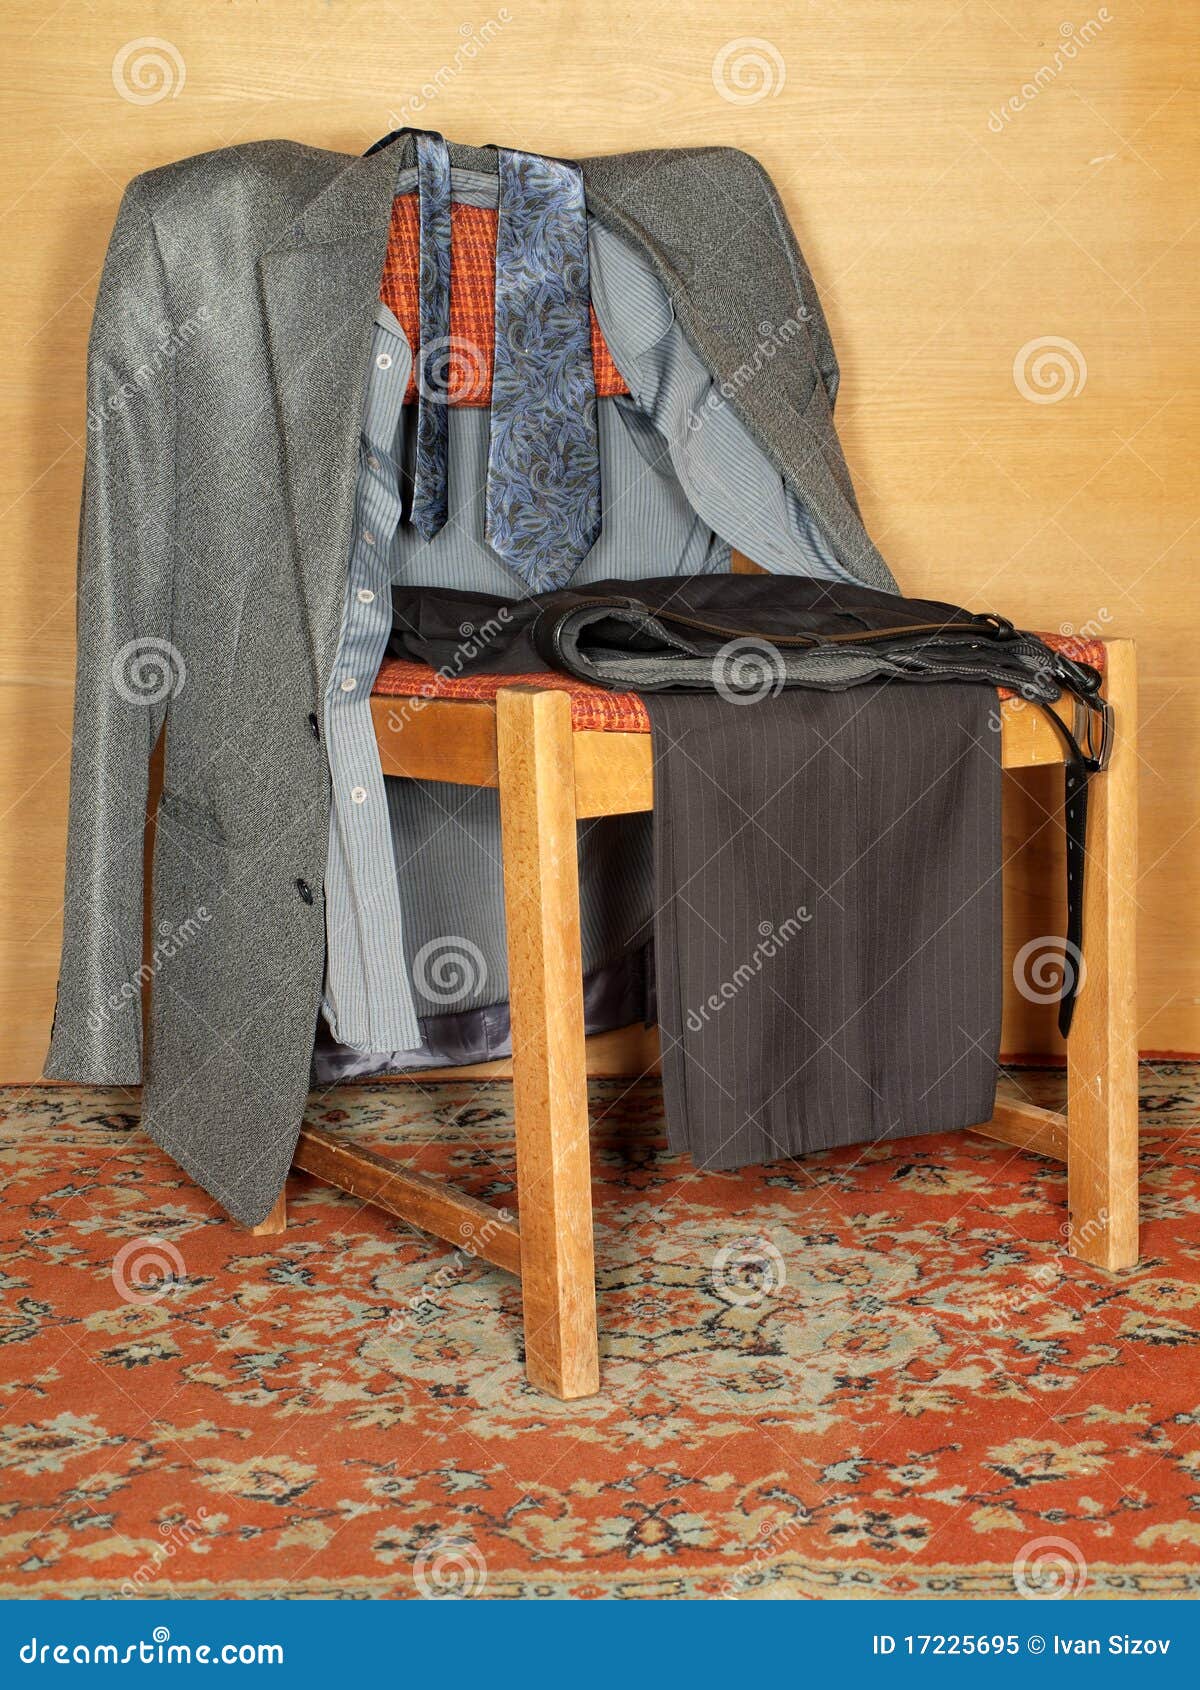 women clothing hanging on chair